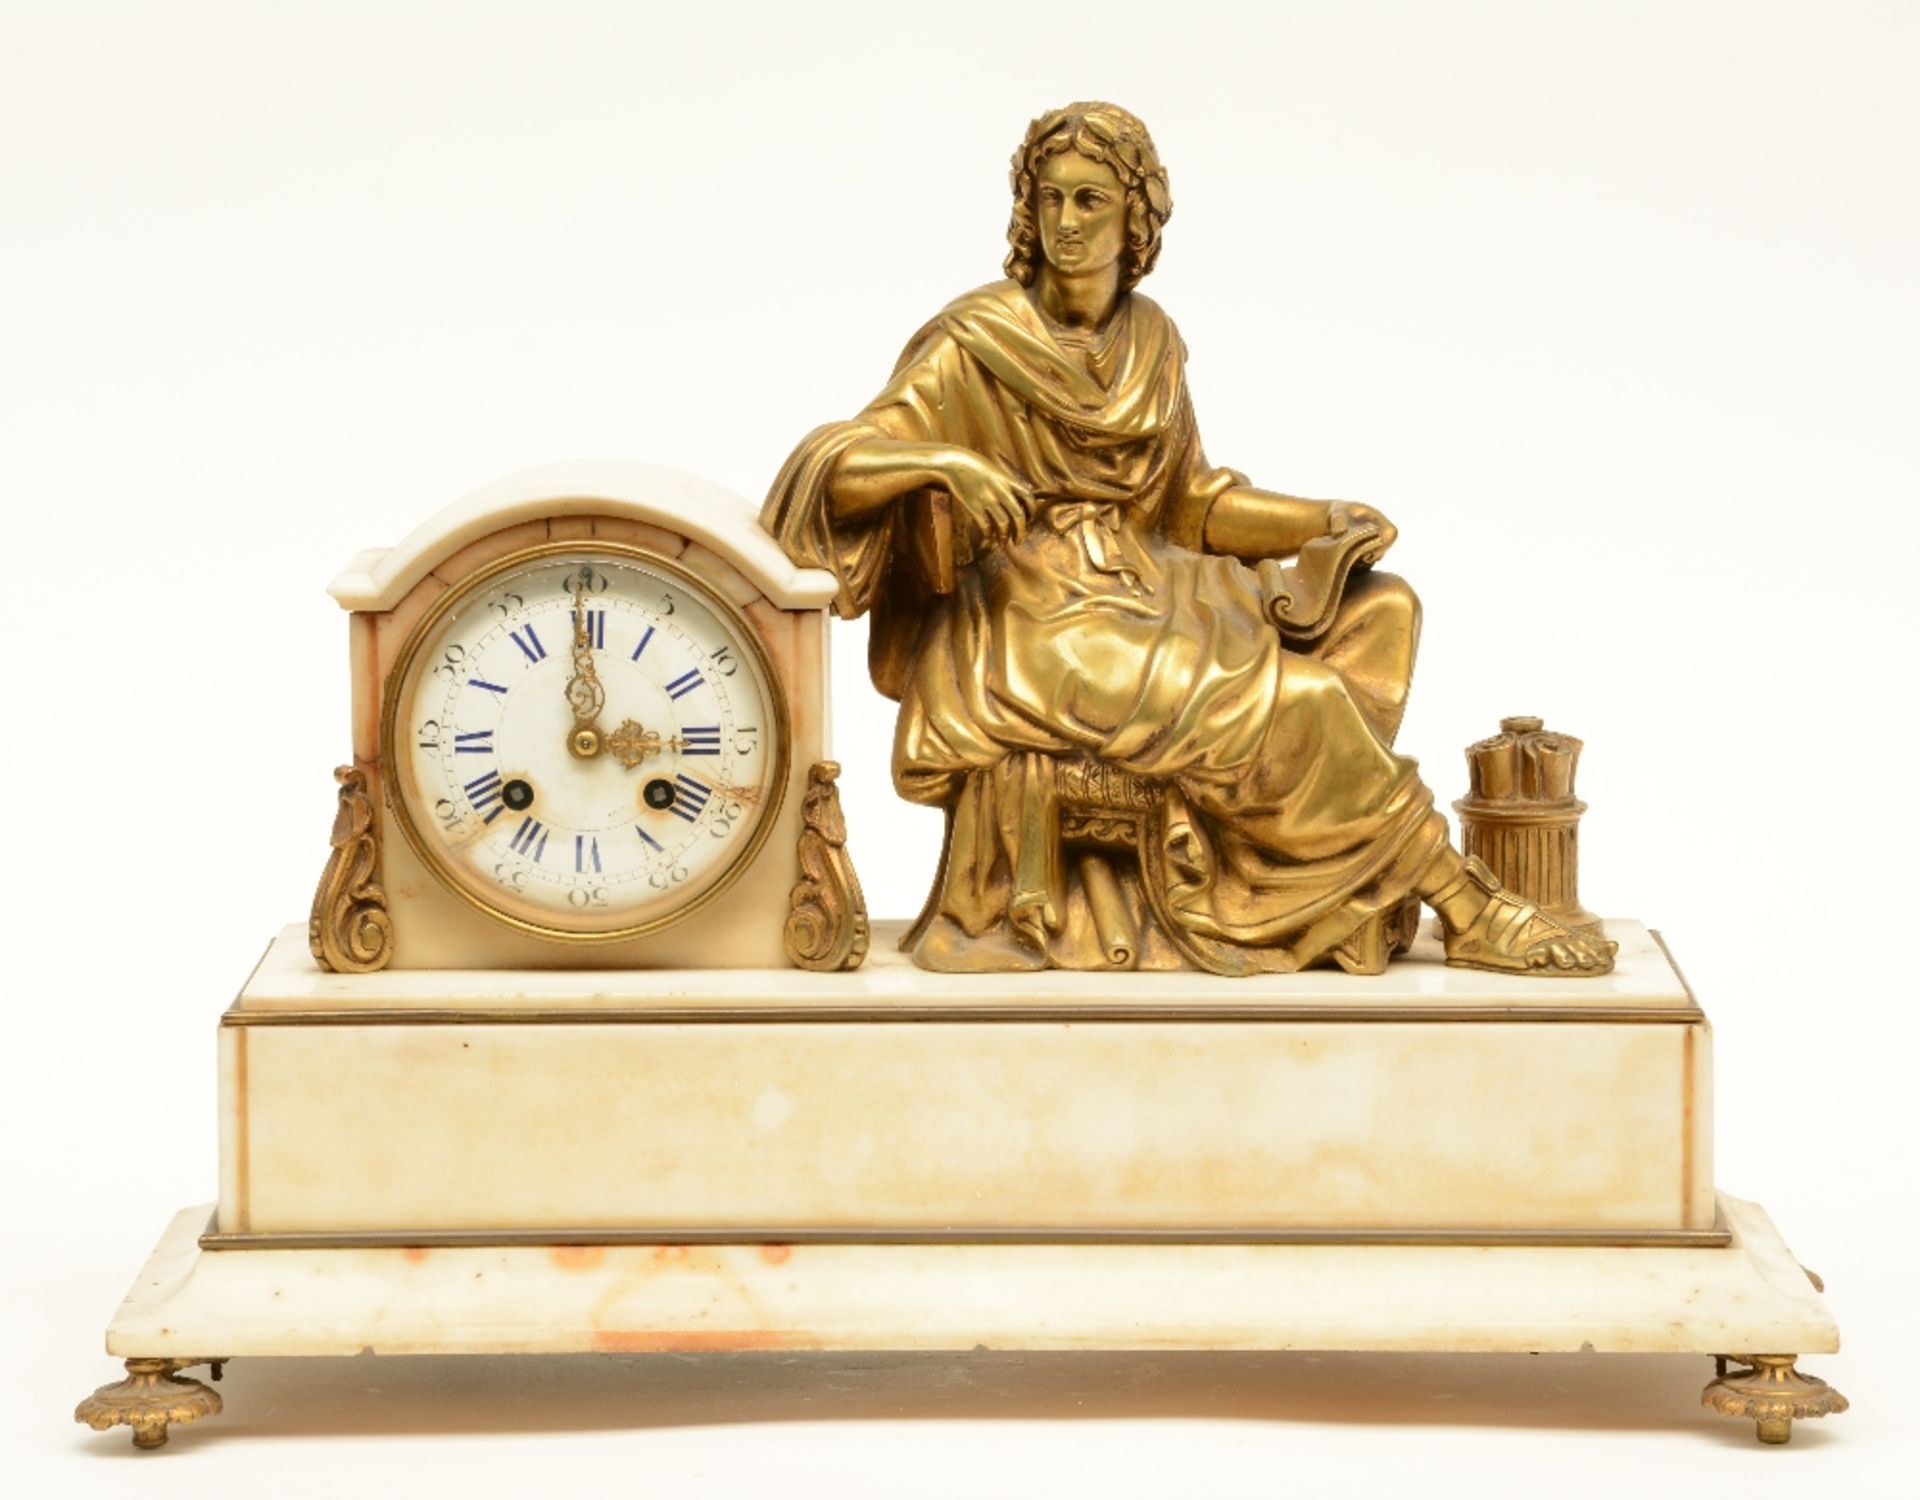 A late 19thC white Carrara marble mantel clock with gilt bronze mounts, on top an allegory on